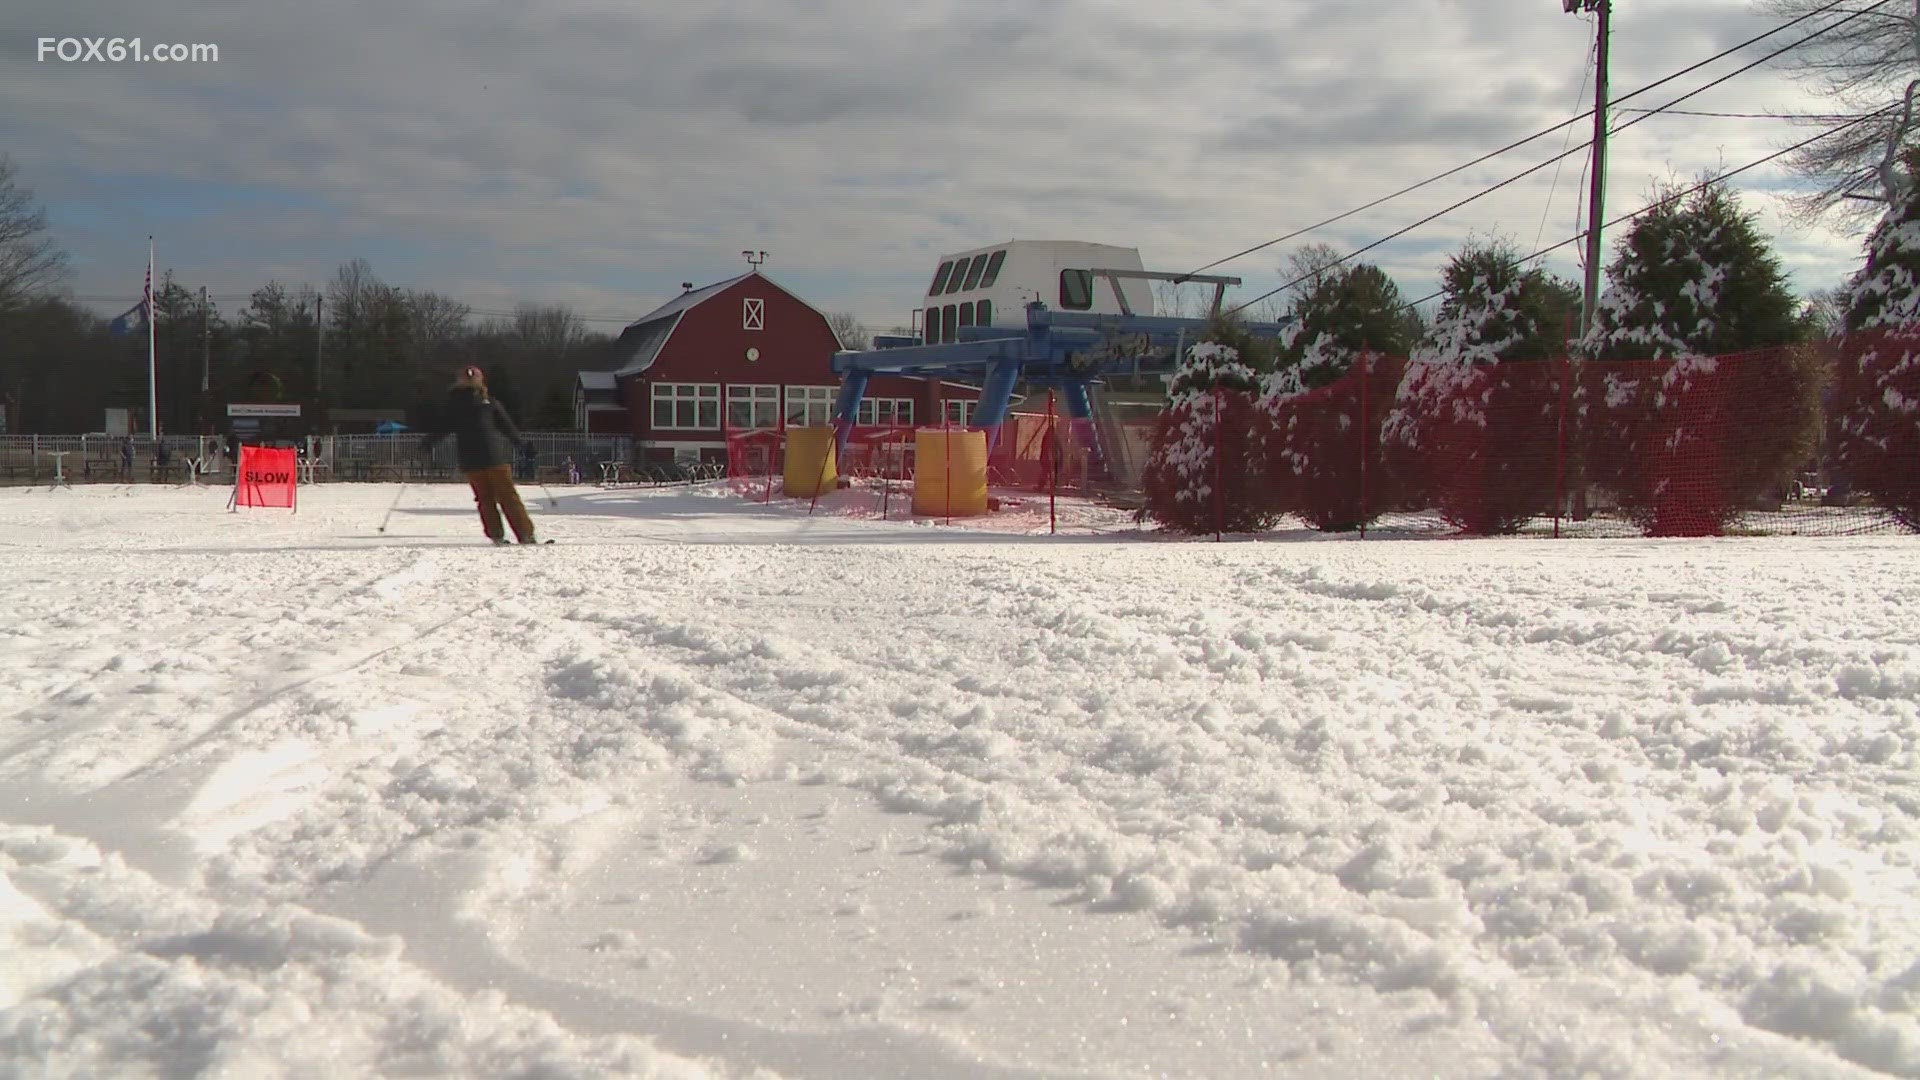 Much-needed cooler temperatures are helping the snow-making efforts.